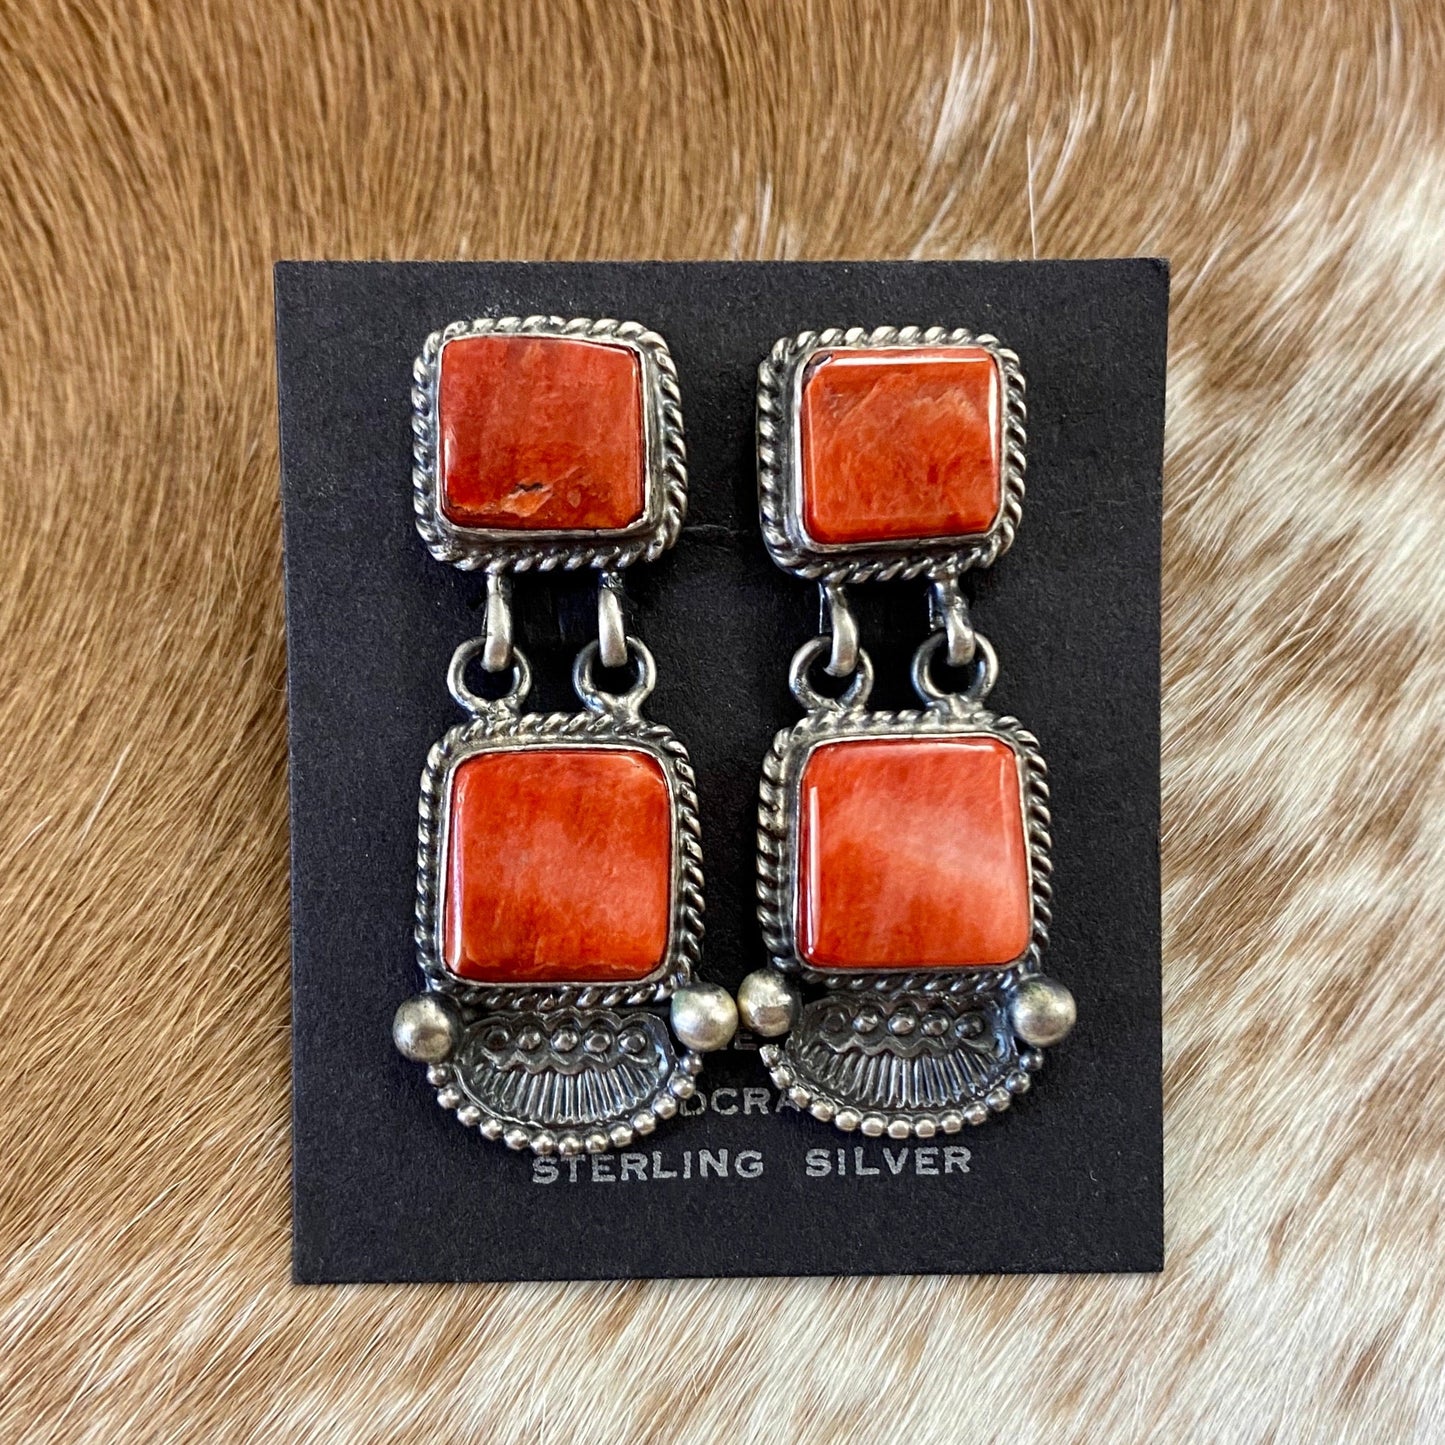 The O.A. Spiny Oyster Earrings - Ny Texas Style Boutique Sterling Silver Spiny Oyster Post Native American Made By Oscar AlexiusRed orange Spiny Oyster post sterling silver earrings. Stamped sterling and signed by Native American artist silversmith Oscar Alexius on the back. The perfect pop of color for any outfit!   Size: 1.25” Inches Length   Stone: Spiny Oyster  Singed: YES "O.A."   Hallmark/Artist: Oscar Alexius 